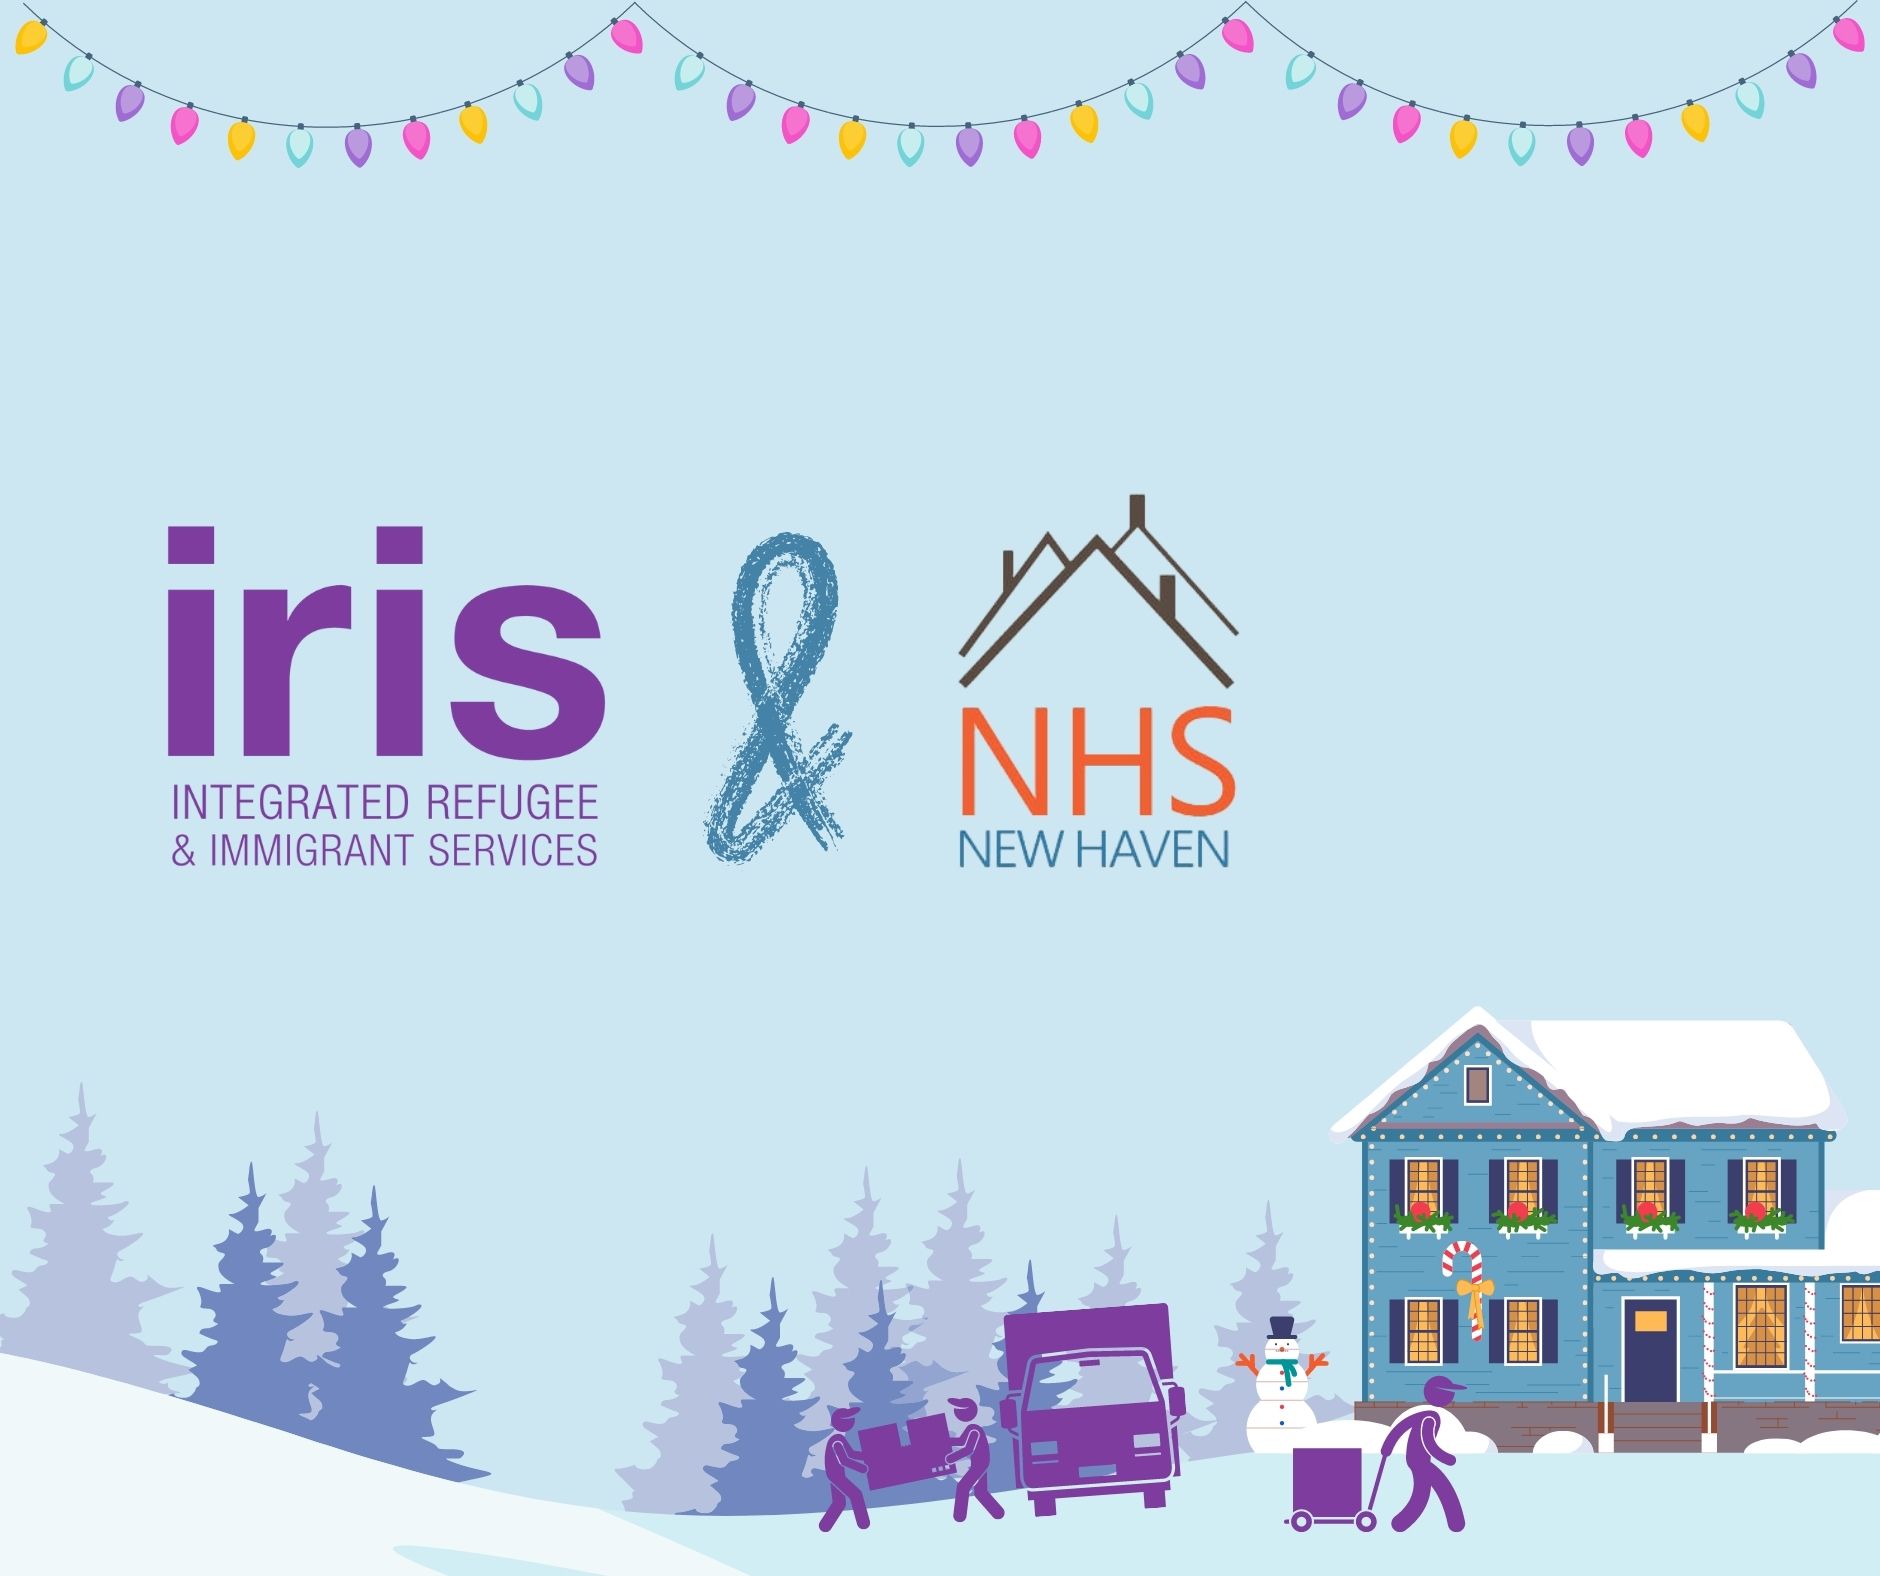 NHS of New Haven partnered with IRIS to give a refugee family housing before the new year